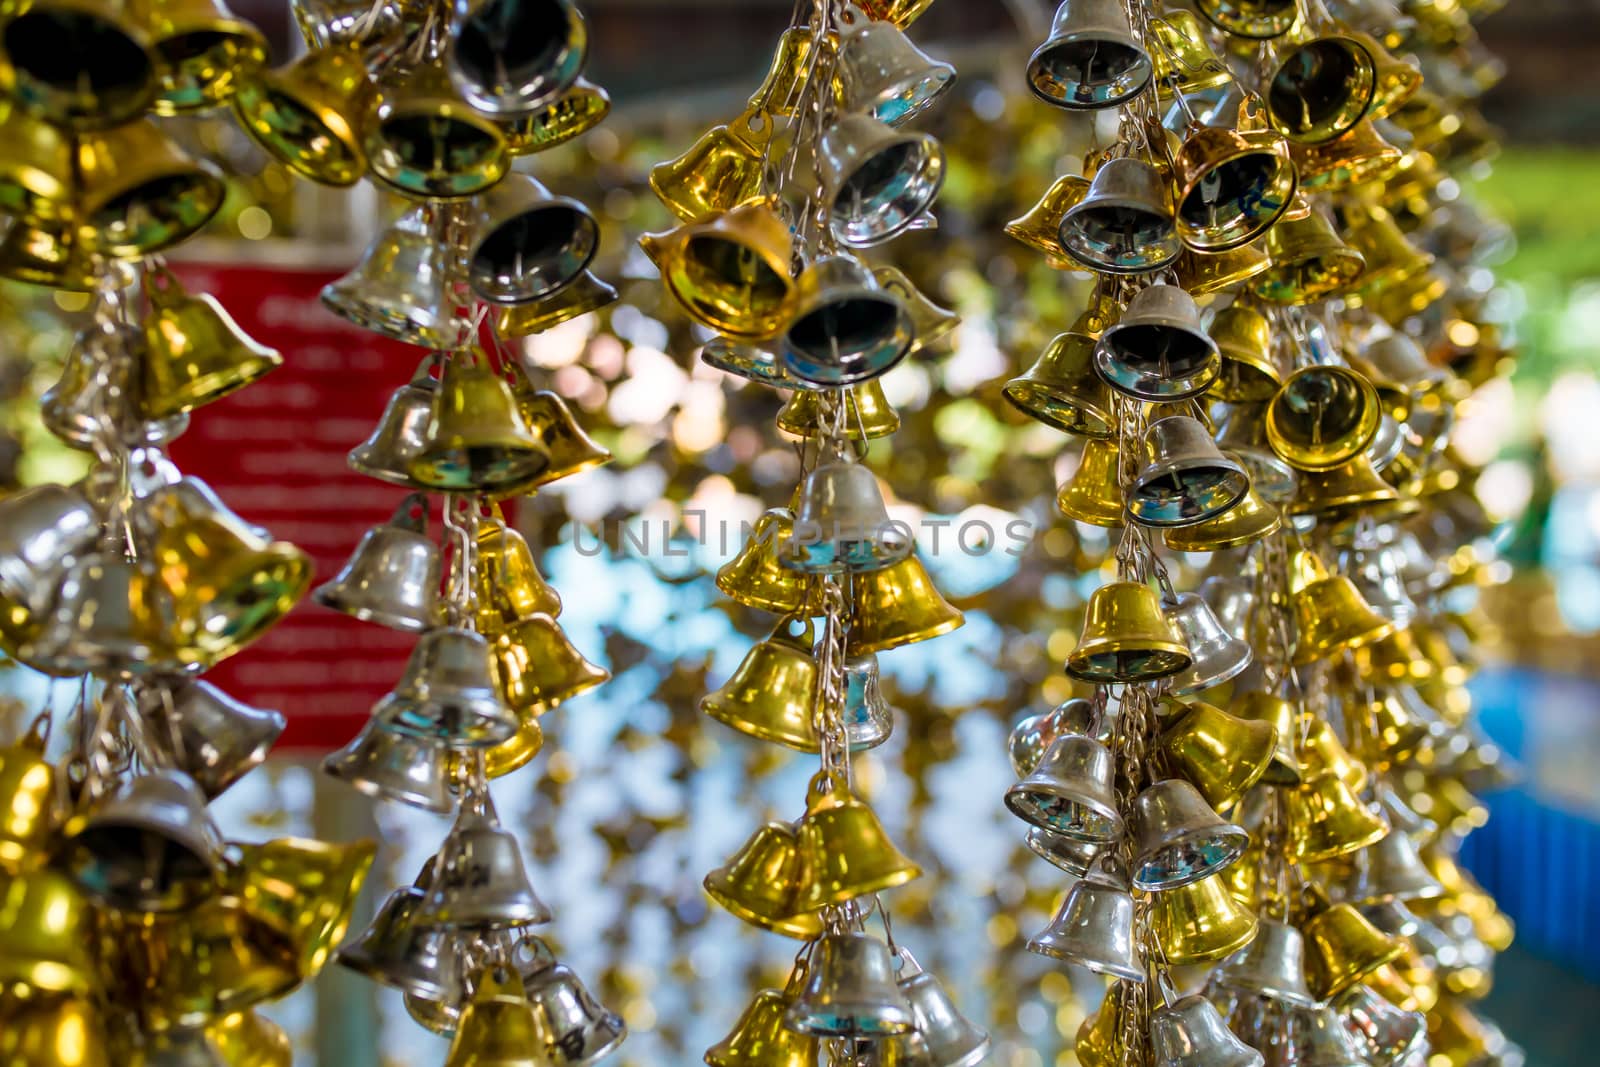 Many small golden and silver bells were hung.